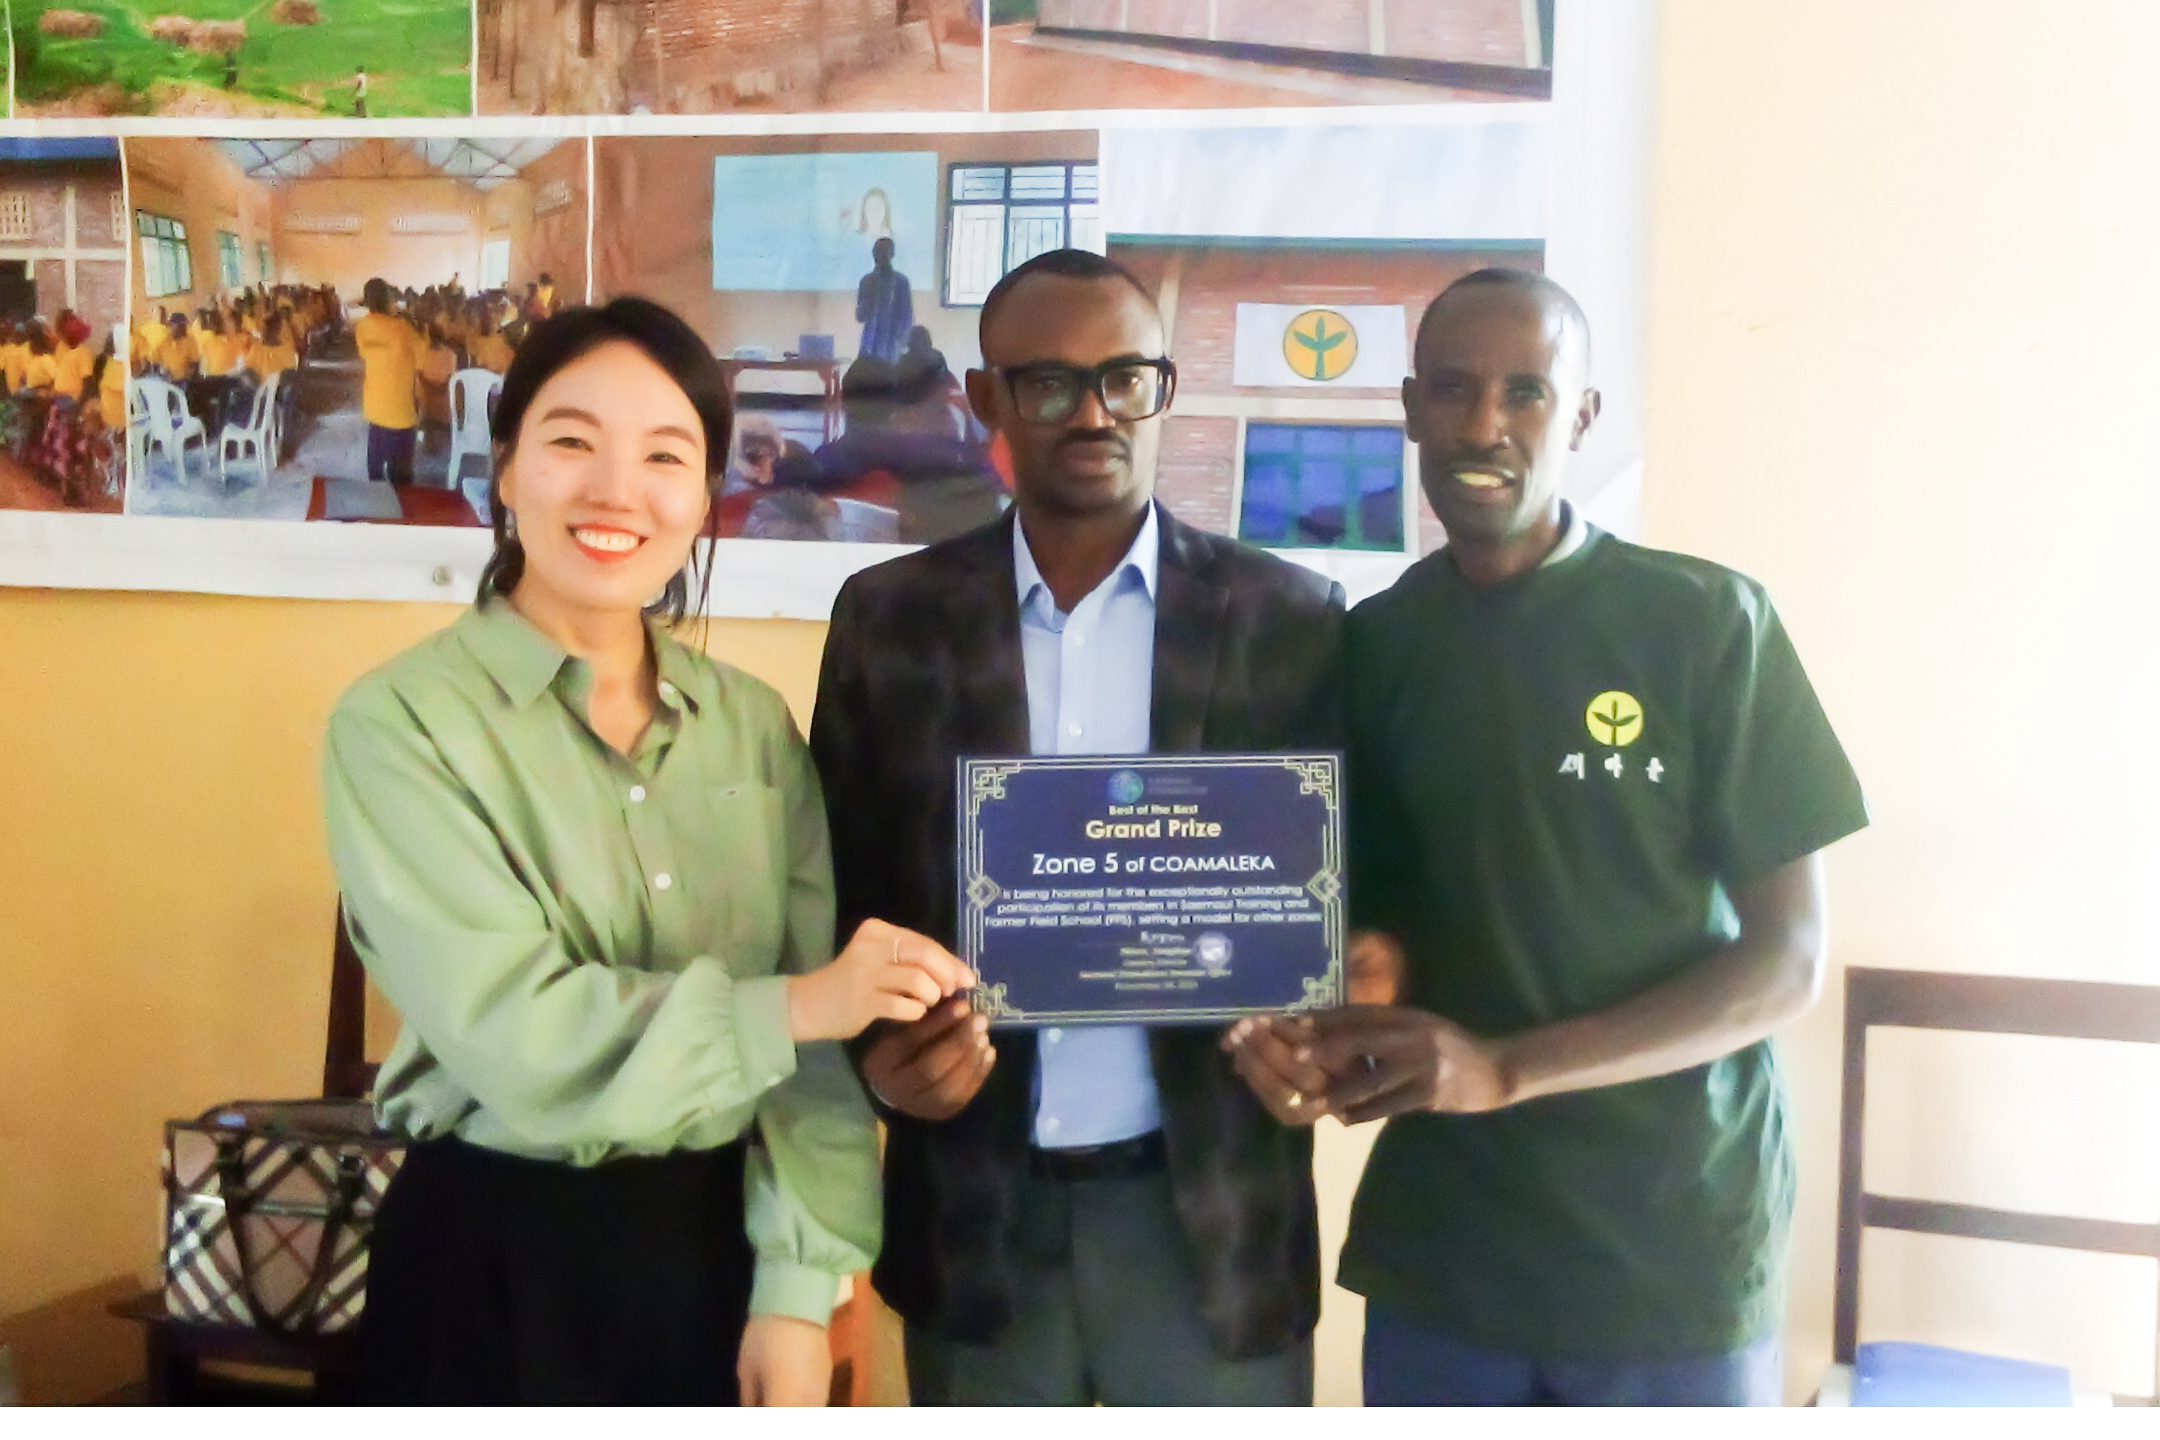 Korean Foundation, Seamaul devotes expertise and facilities to farmers in Kamonyi district